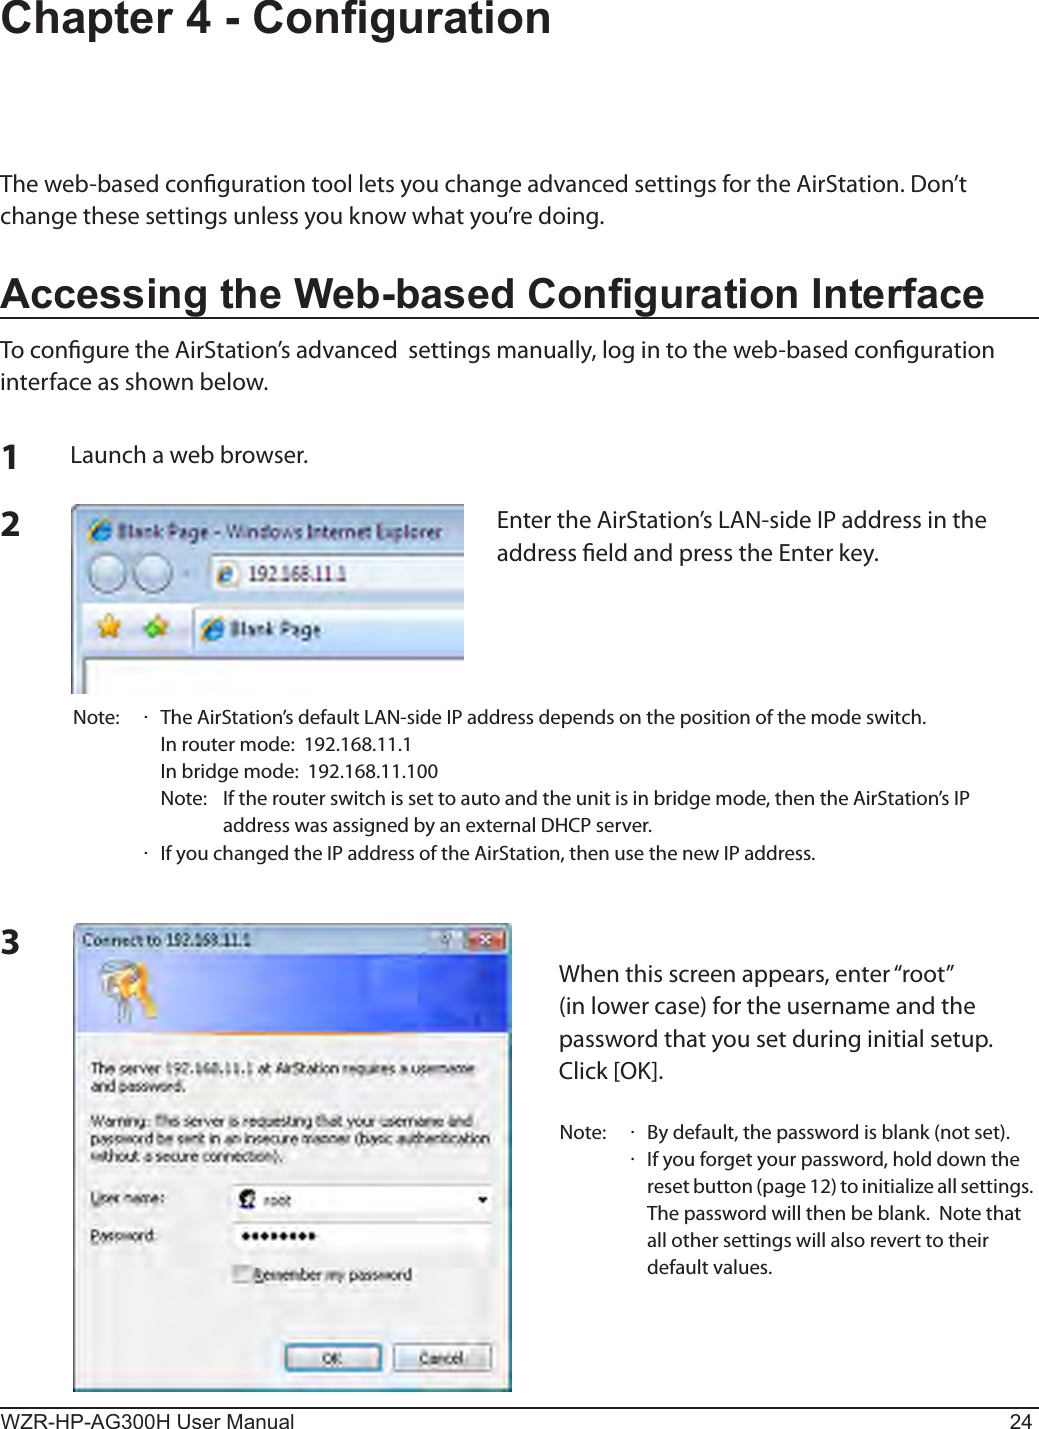 WZR-HP-AG300H User Manual 24Chapter 4 - CongurationThe web-based conguration tool lets you change advanced settings for the AirStation. Don’t change these settings unless you know what you’re doing.Accessing the Web-based Conguration InterfaceTo congure the AirStation’s advanced  settings manually, log in to the web-based conguration interface as shown below.123Launch a web browser.Enter the AirStation’s LAN-side IP address in the address eld and press the Enter key.Note:  ·  The AirStation’s default LAN-side IP address depends on the position of the mode switch.  In router mode:  192.168.11.1   In bridge mode:  192.168.11.100   Note:   If the router switch is set to auto and the unit is in bridge mode, then the AirStation’s IP address was assigned by an external DHCP server.  ·  If you changed the IP address of the AirStation, then use the new IP address.When this screen appears, enter “root” (in lower case) for the username and the password that you set during initial setup.  Click [OK].Note:  ·  By default, the password is blank (not set). ·   If you forget your password, hold down the reset button (page 12) to initialize all settings. The password will then be blank.  Note that all other settings will also revert to their default values.